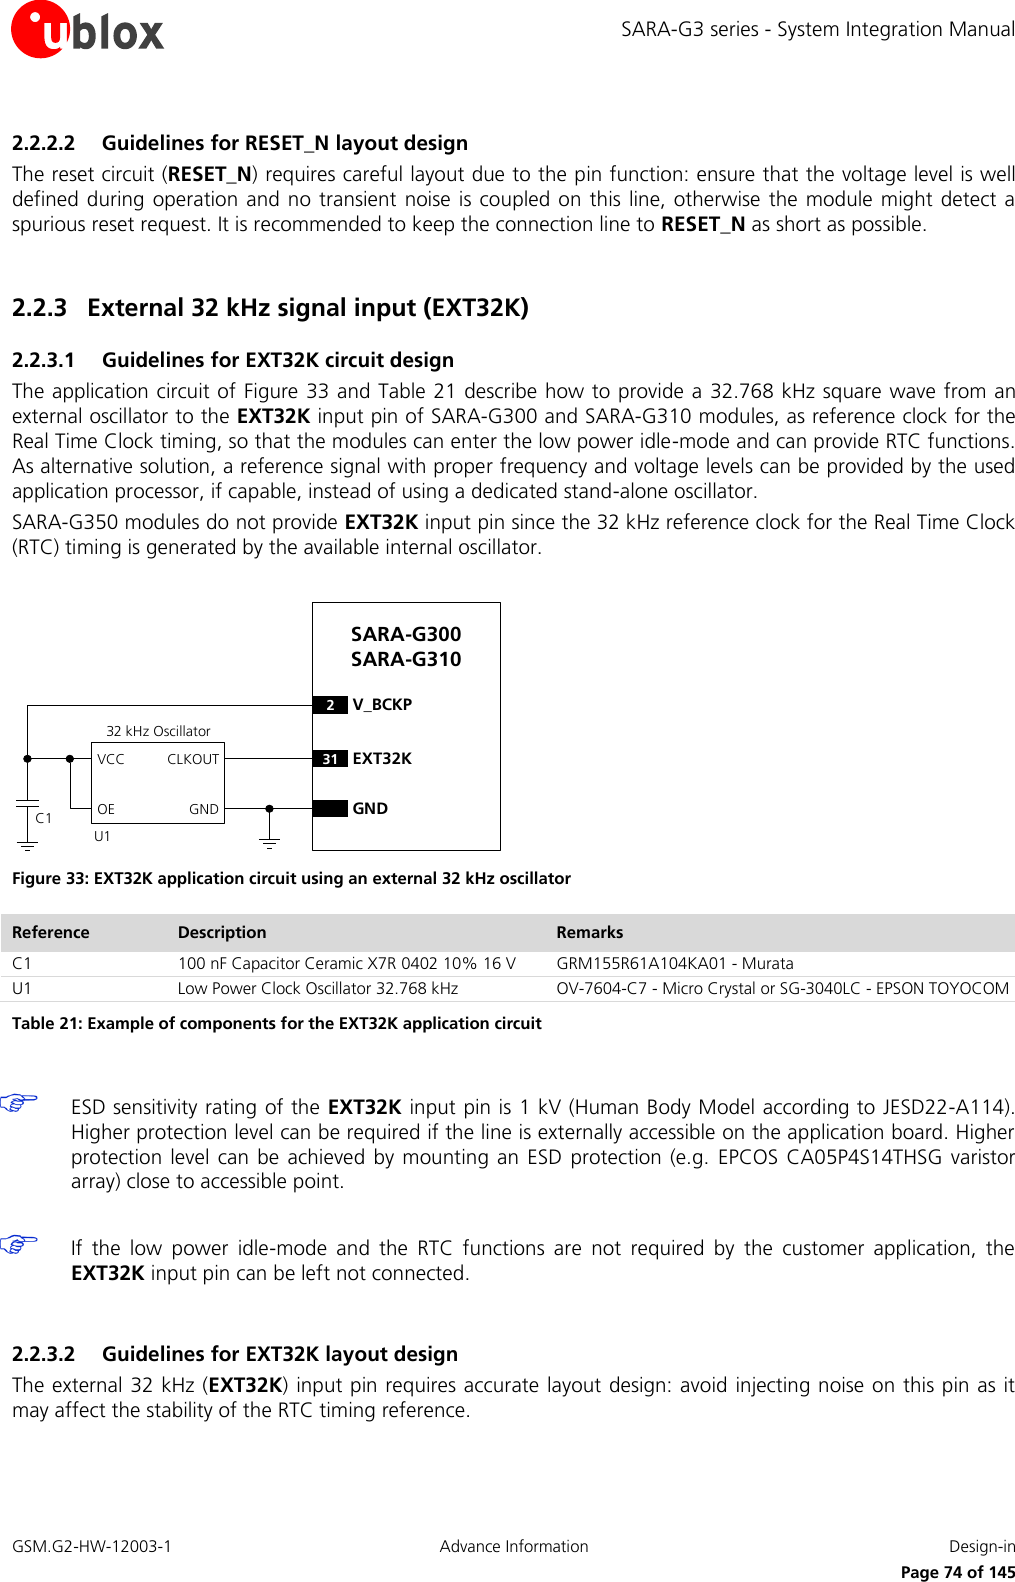 SARA-G3 series - System Integration Manual GSM.G2-HW-12003-1  Advance Information  Design-in     Page 74 of 145 2.2.2.2 Guidelines for RESET_N layout design The reset circuit (RESET_N) requires careful layout due to the pin function: ensure that the voltage level is well defined during  operation and no  transient noise  is coupled on  this line,  otherwise  the  module might  detect a spurious reset request. It is recommended to keep the connection line to RESET_N as short as possible.  2.2.3 External 32 kHz signal input (EXT32K) 2.2.3.1 Guidelines for EXT32K circuit design The application circuit of  Figure 33 and Table 21 describe how to provide a 32.768 kHz square wave from an external oscillator to the EXT32K input pin of SARA-G300 and SARA-G310 modules, as reference clock for the Real Time Clock timing, so that the modules can enter the low power idle-mode and can provide RTC functions. As alternative solution, a reference signal with proper frequency and voltage levels can be provided by the used application processor, if capable, instead of using a dedicated stand-alone oscillator. SARA-G350 modules do not provide EXT32K input pin since the 32 kHz reference clock for the Real Time Clock (RTC) timing is generated by the available internal oscillator.  2V_BCKPGNDSARA-G300 SARA-G31031 EXT32K32 kHz OscillatorGNDCLKOUTOEVCCC1U1 Figure 33: EXT32K application circuit using an external 32 kHz oscillator Reference Description Remarks C1 100 nF Capacitor Ceramic X7R 0402 10% 16 V GRM155R61A104KA01 - Murata U1 Low Power Clock Oscillator 32.768 kHz OV-7604-C7 - Micro Crystal or SG-3040LC - EPSON TOYOCOM Table 21: Example of components for the EXT32K application circuit   ESD sensitivity rating of the EXT32K input pin is 1 kV (Human Body Model according to JESD22-A114). Higher protection level can be required if the line is externally accessible on the application board. Higher protection  level can  be achieved  by  mounting  an ESD  protection (e.g.  EPCOS  CA05P4S14THSG  varistor array) close to accessible point.   If  the  low  power  idle-mode  and  the  RTC  functions  are  not  required  by  the  customer  application,  the EXT32K input pin can be left not connected.  2.2.3.2 Guidelines for EXT32K layout design The external 32 kHz (EXT32K) input pin requires accurate layout design: avoid injecting noise on this pin as it may affect the stability of the RTC timing reference.  